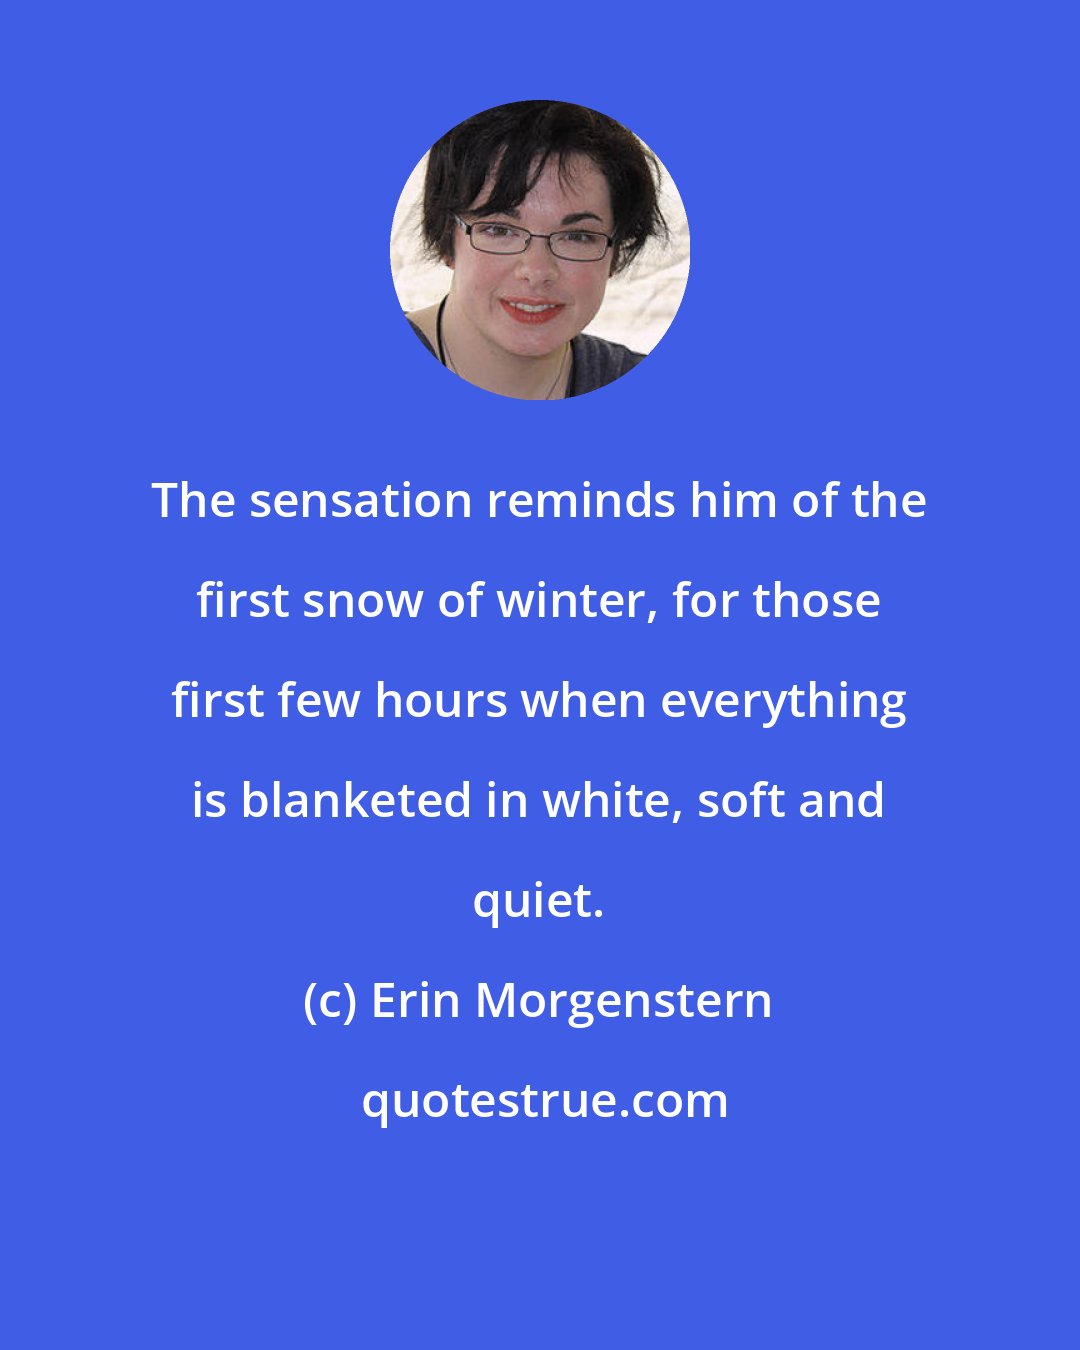 Erin Morgenstern: The sensation reminds him of the first snow of winter, for those first few hours when everything is blanketed in white, soft and quiet.